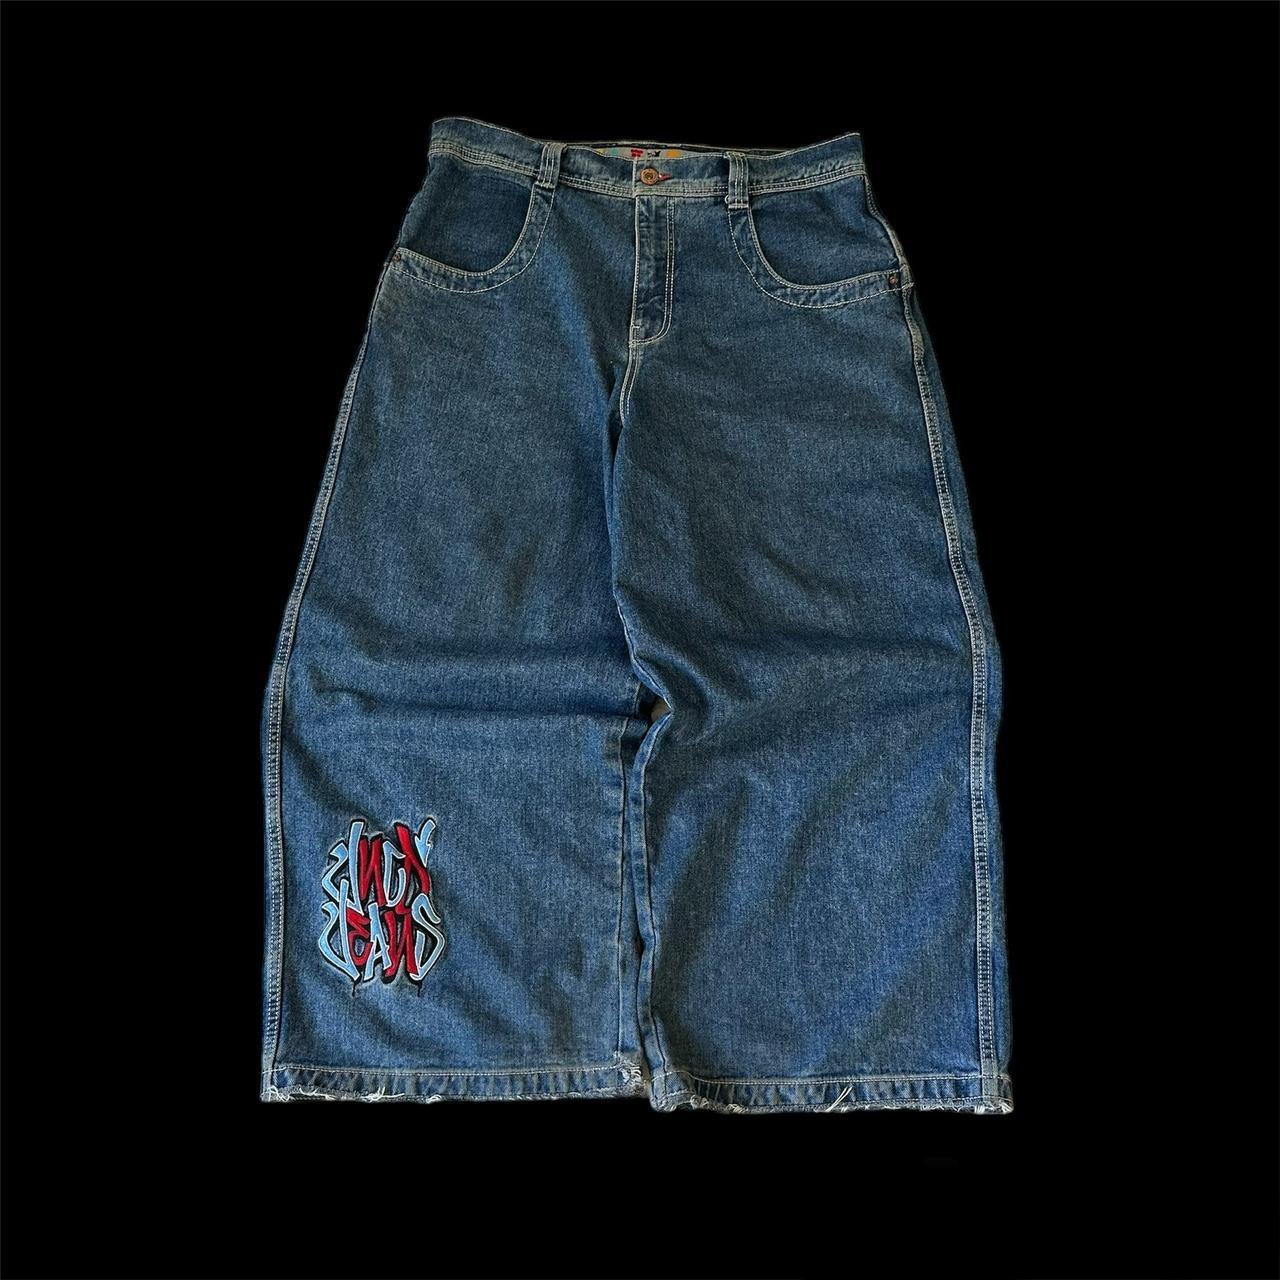 jnco rollin do not buy not real price, they r... - Depop